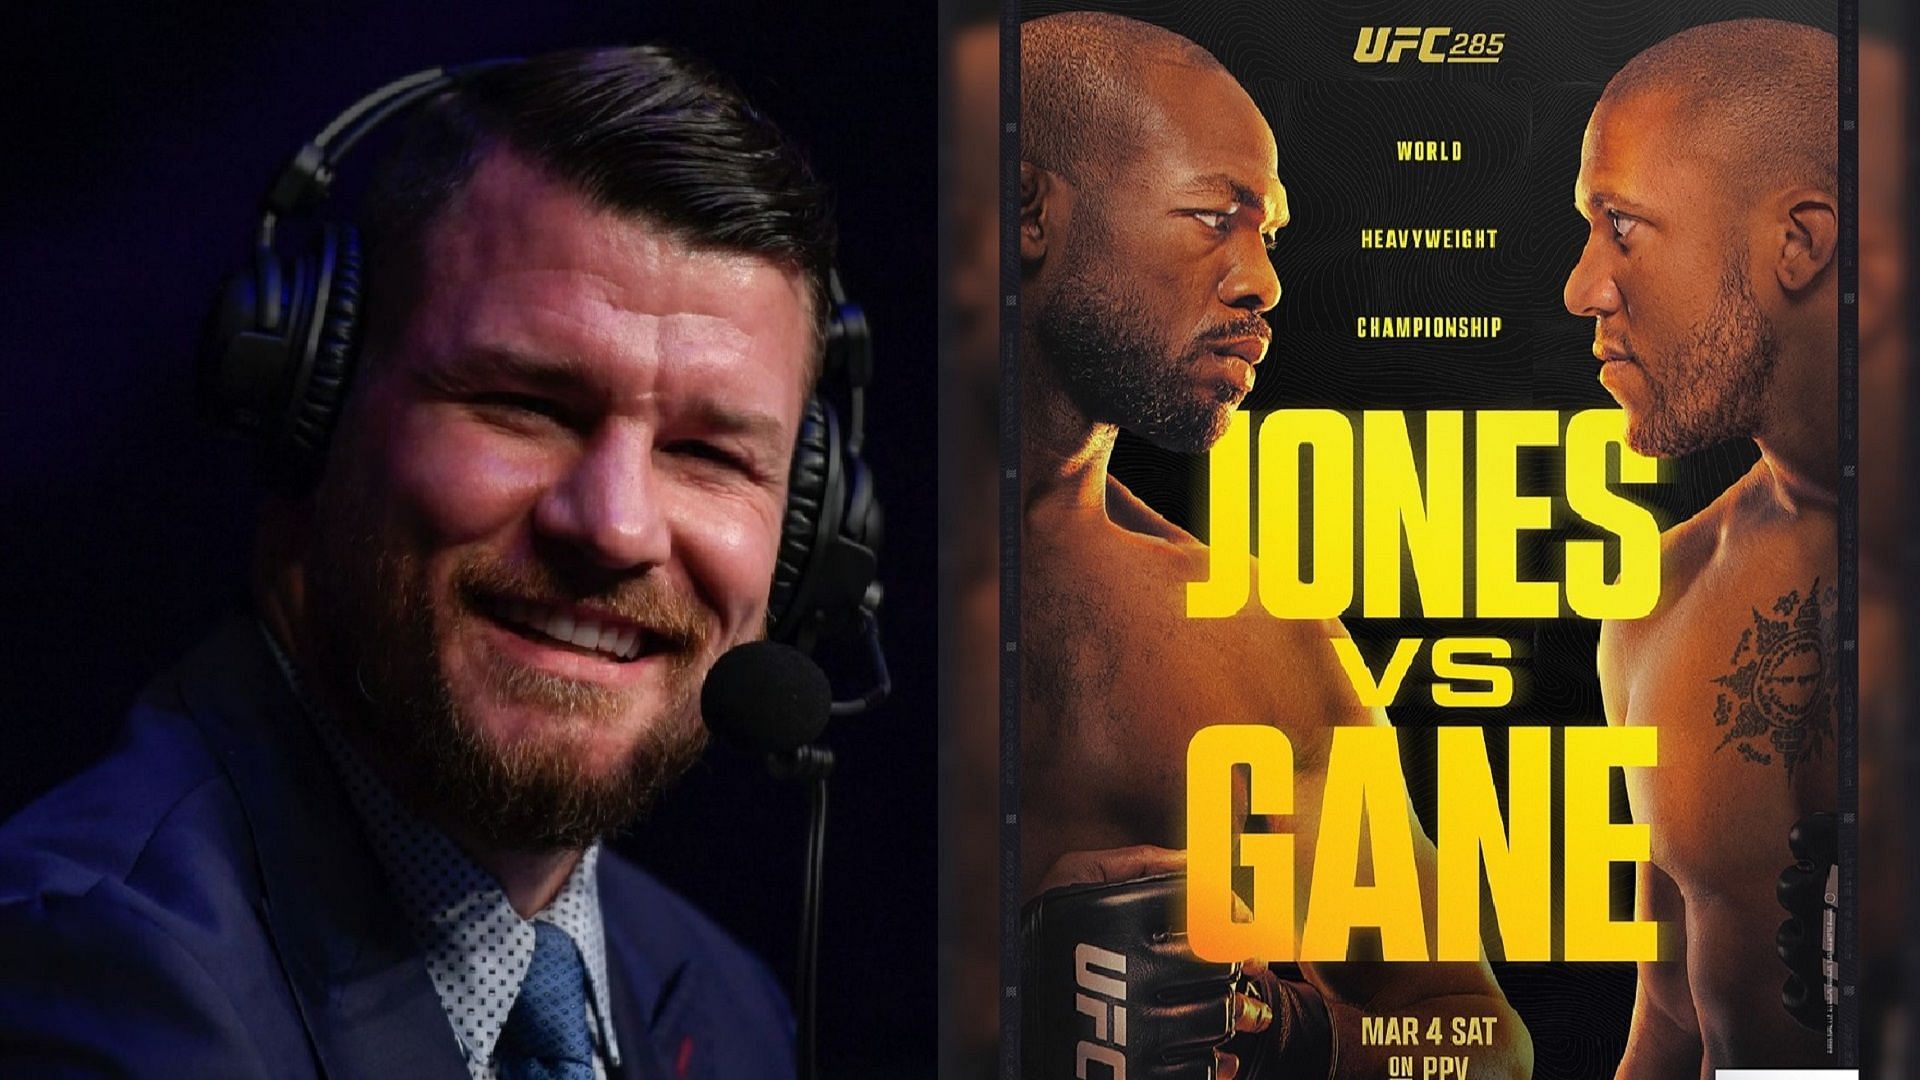 Michael Bisping (left) &amp; Jones vs. Gane poster (right) [Images via Getty and @ufc on Instagram]